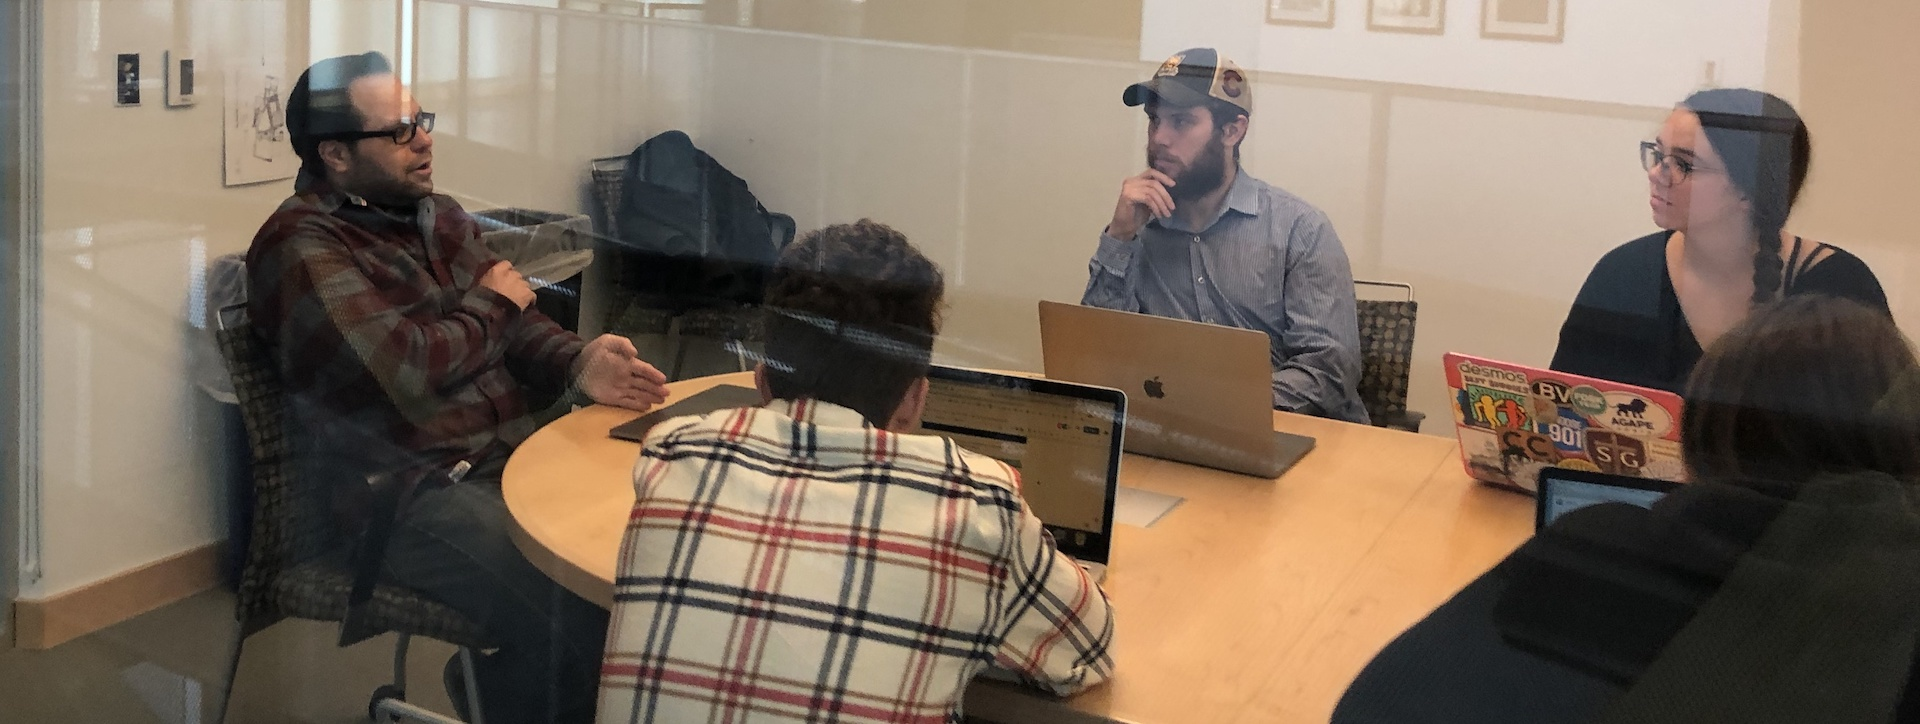 Journalism students strategize with publisher John Rodriguez on a series they produced about cannabis in southern Colorado for PULP newsmagazine in 2019.